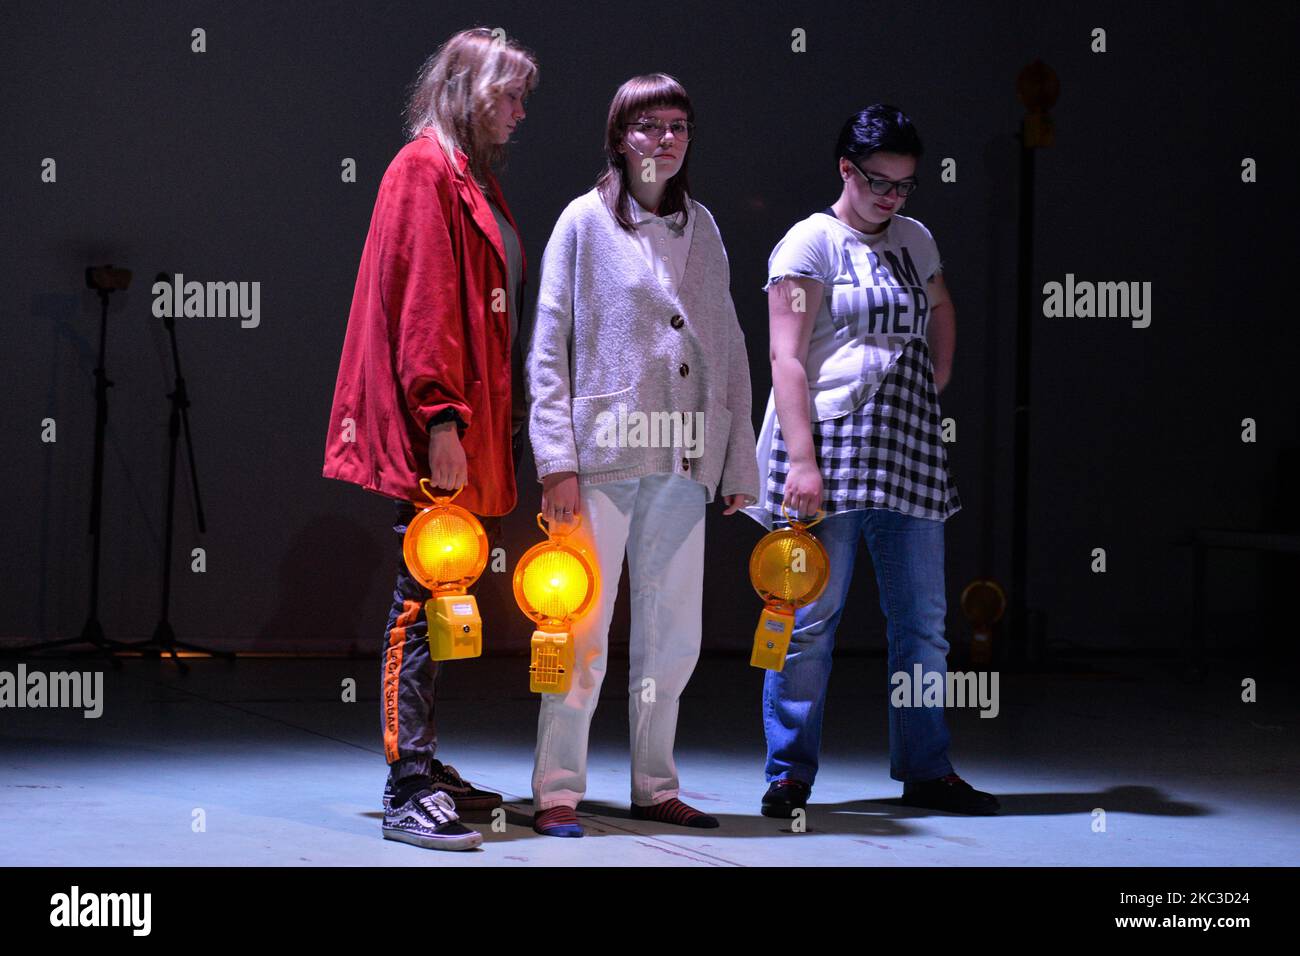 Actresses (L-R) Patrycja Andrychowicz , Agnieszka Wojcik i Martyna Flakowicz during the rehearsal of the performance 'We Are the Future' directed by Jakub Skrzywanek, as part of the 24th International Festival of Theaters for Children and Youth KORCZAK TODAY (On-Line), at the Nowy Theater in Krakow. From tomorrow, new restrictions will apply in Poland. All theaters, museums, and galleries will be closed, and primary schools will be launched online as part of the new measures announced by PM Mateusz Morawiecki, on Wednesday November 4, to counter the sharp increase in the coronavirus infection  Stock Photo